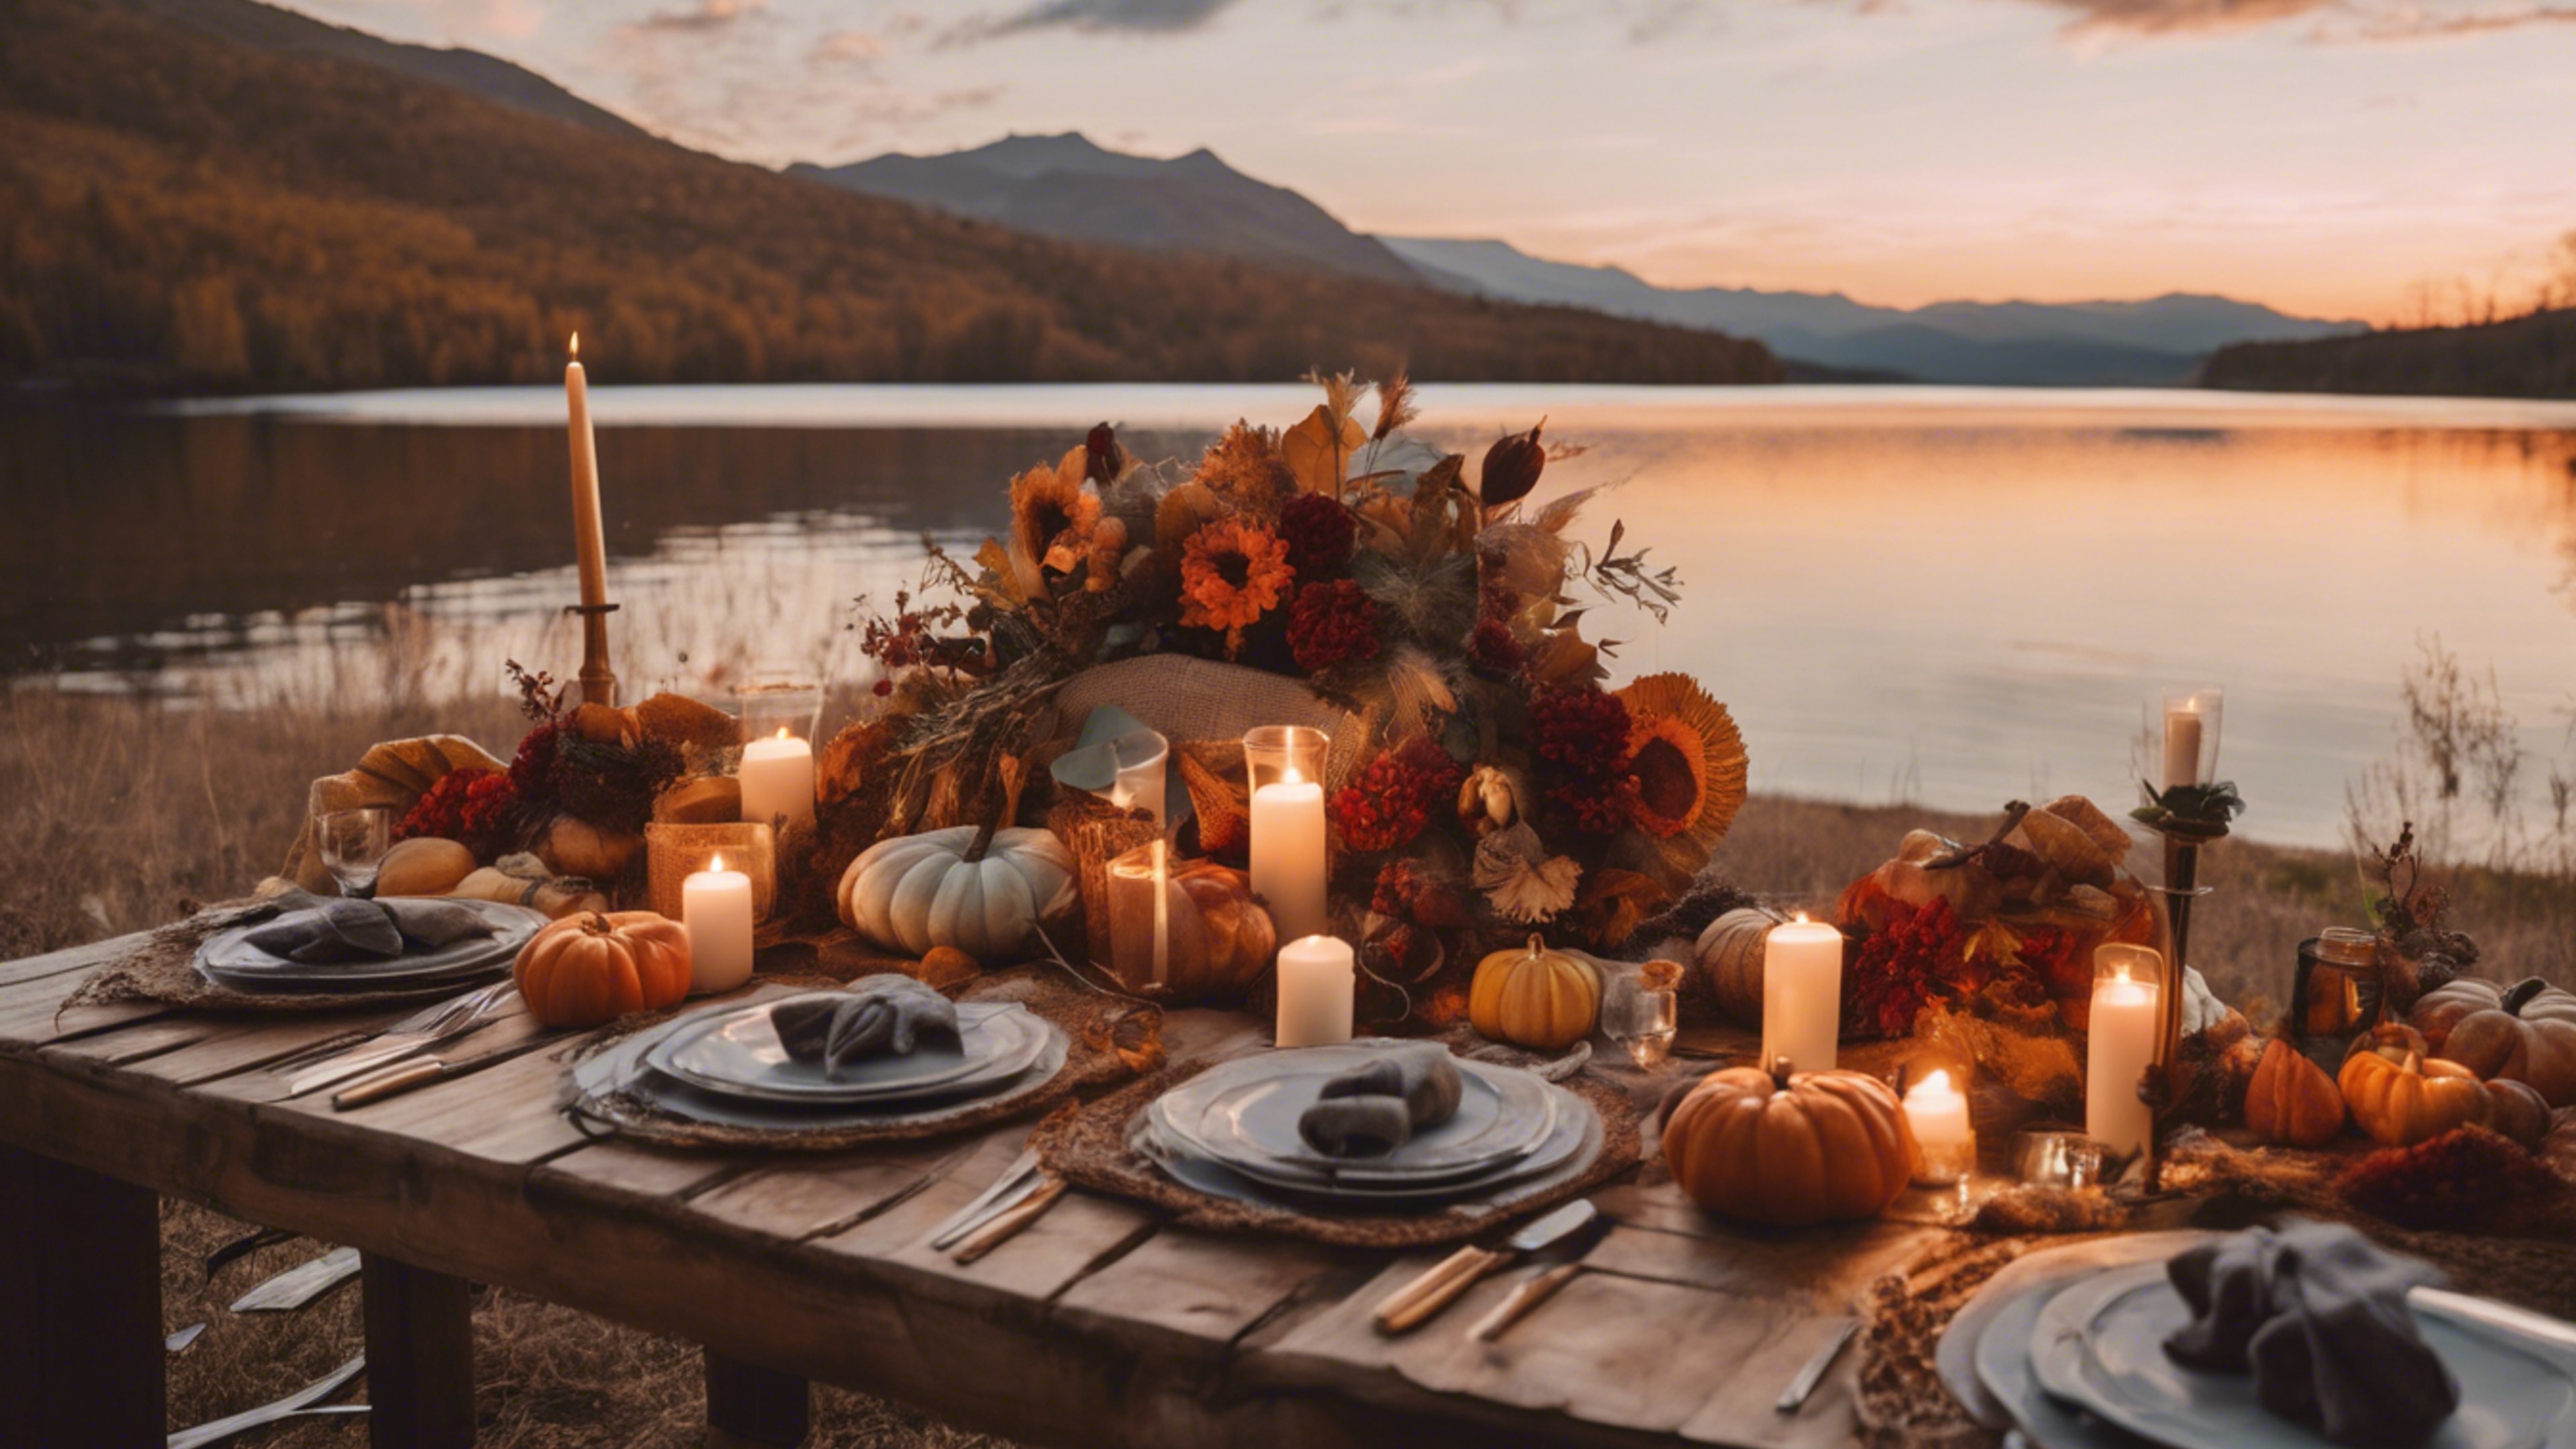 An outdoor Thanksgiving setup with boho decorations next to a breathtaking mountain lake during sunset. Hình nền[488ff8a1b73146e3b682]